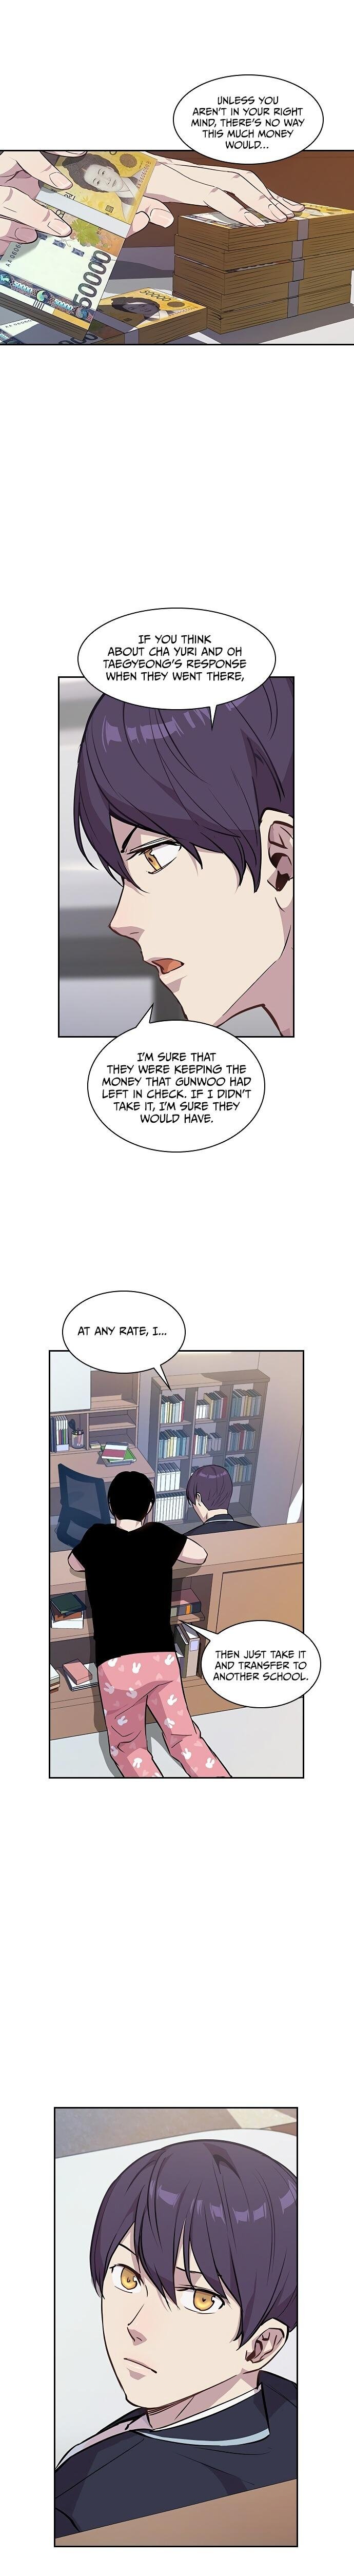 the-world-is-money-and-power-chap-37-3